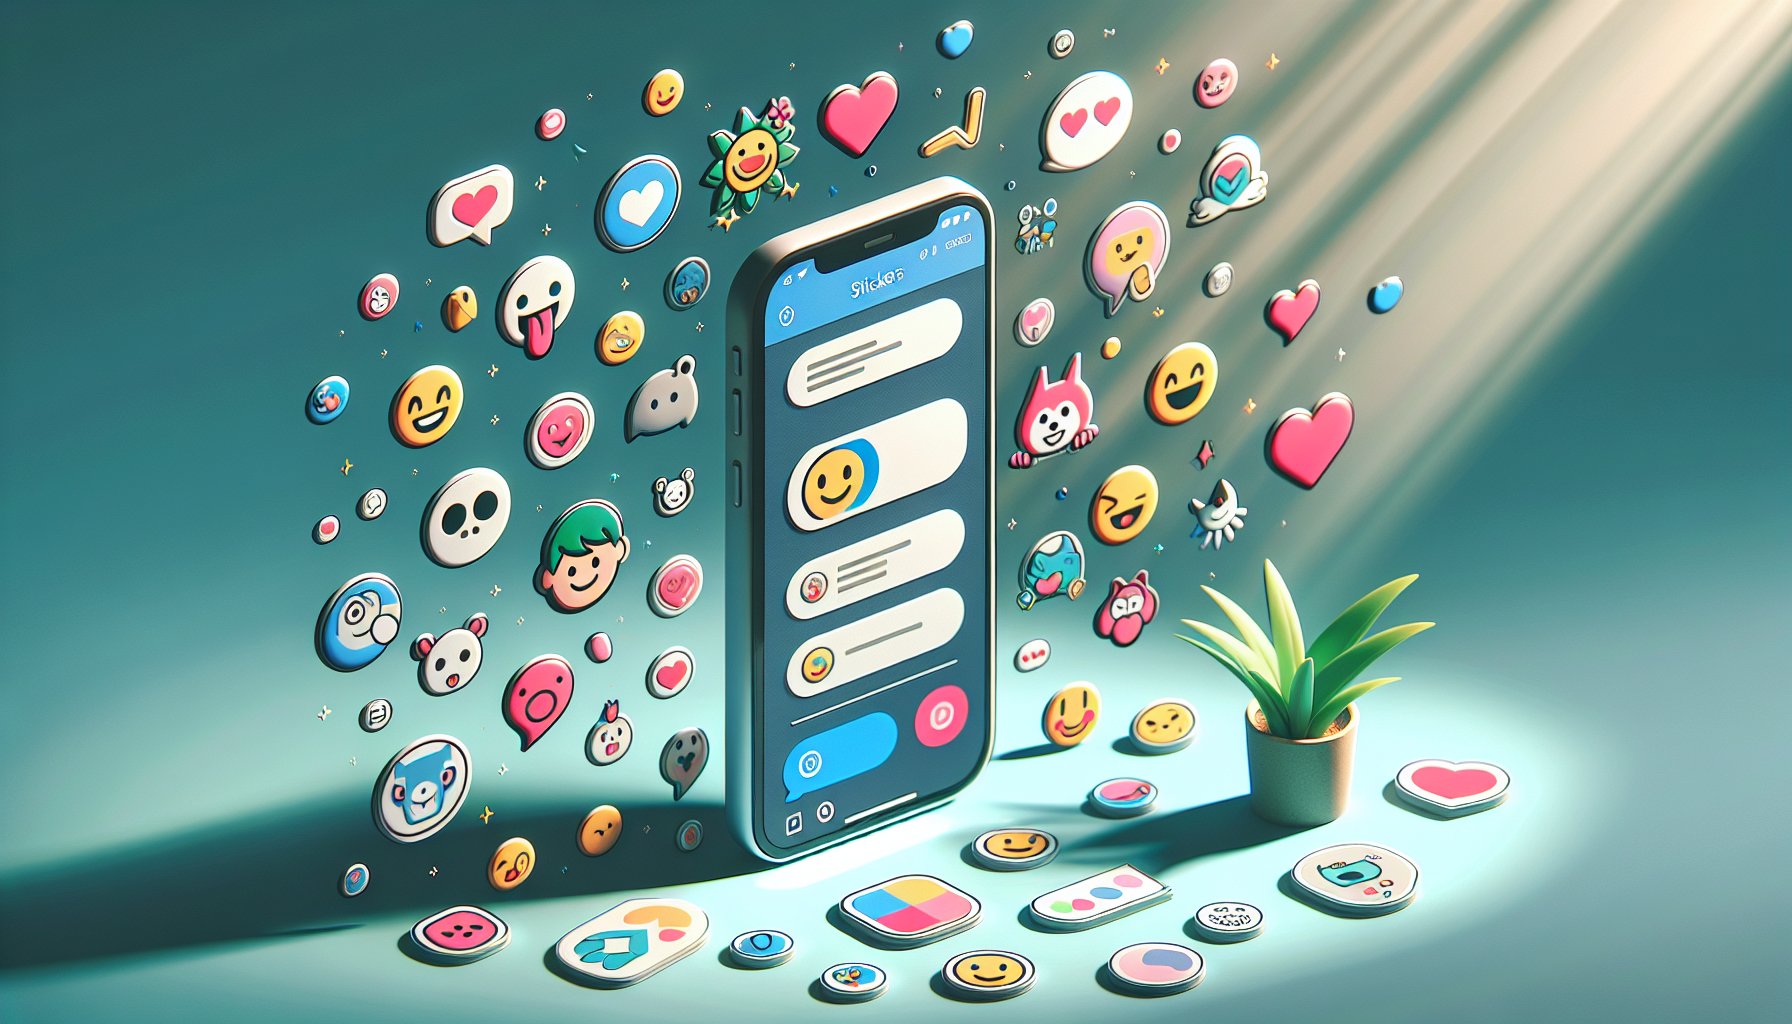 WhatsApp Channels Stickers Set To Enhance Broadcasting on the Popular Messaging Platform